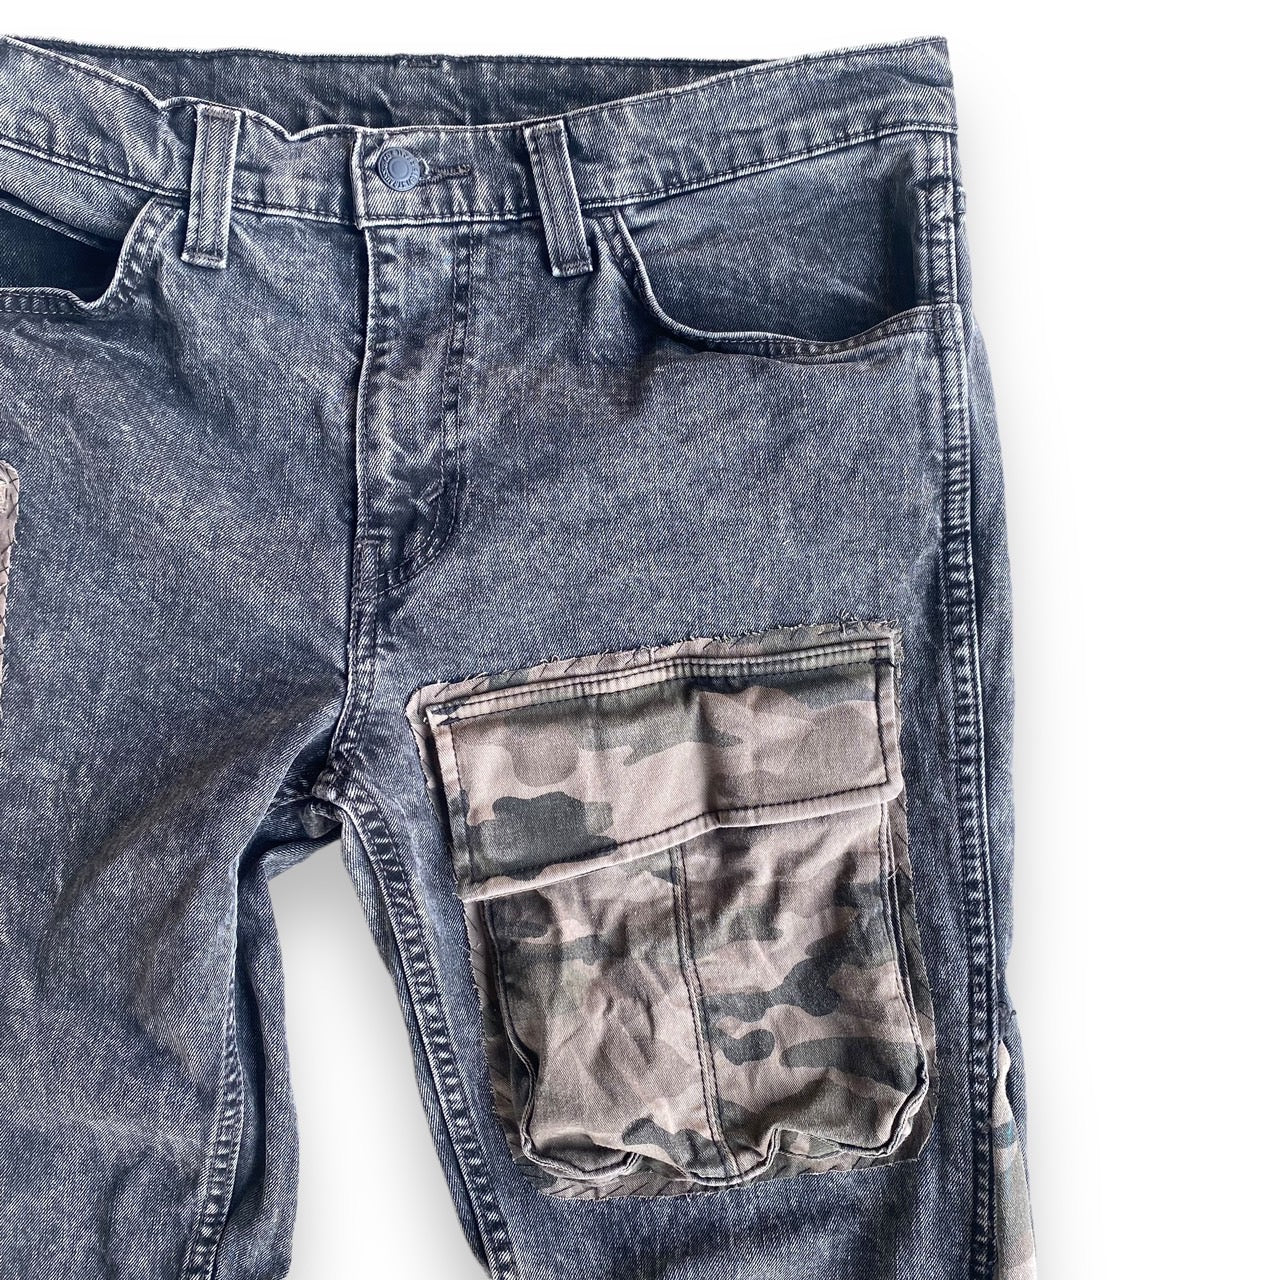 Levi's 511 Custom Reworked Flare Panel Camo Pocket Black Jeans by Archive.Grn